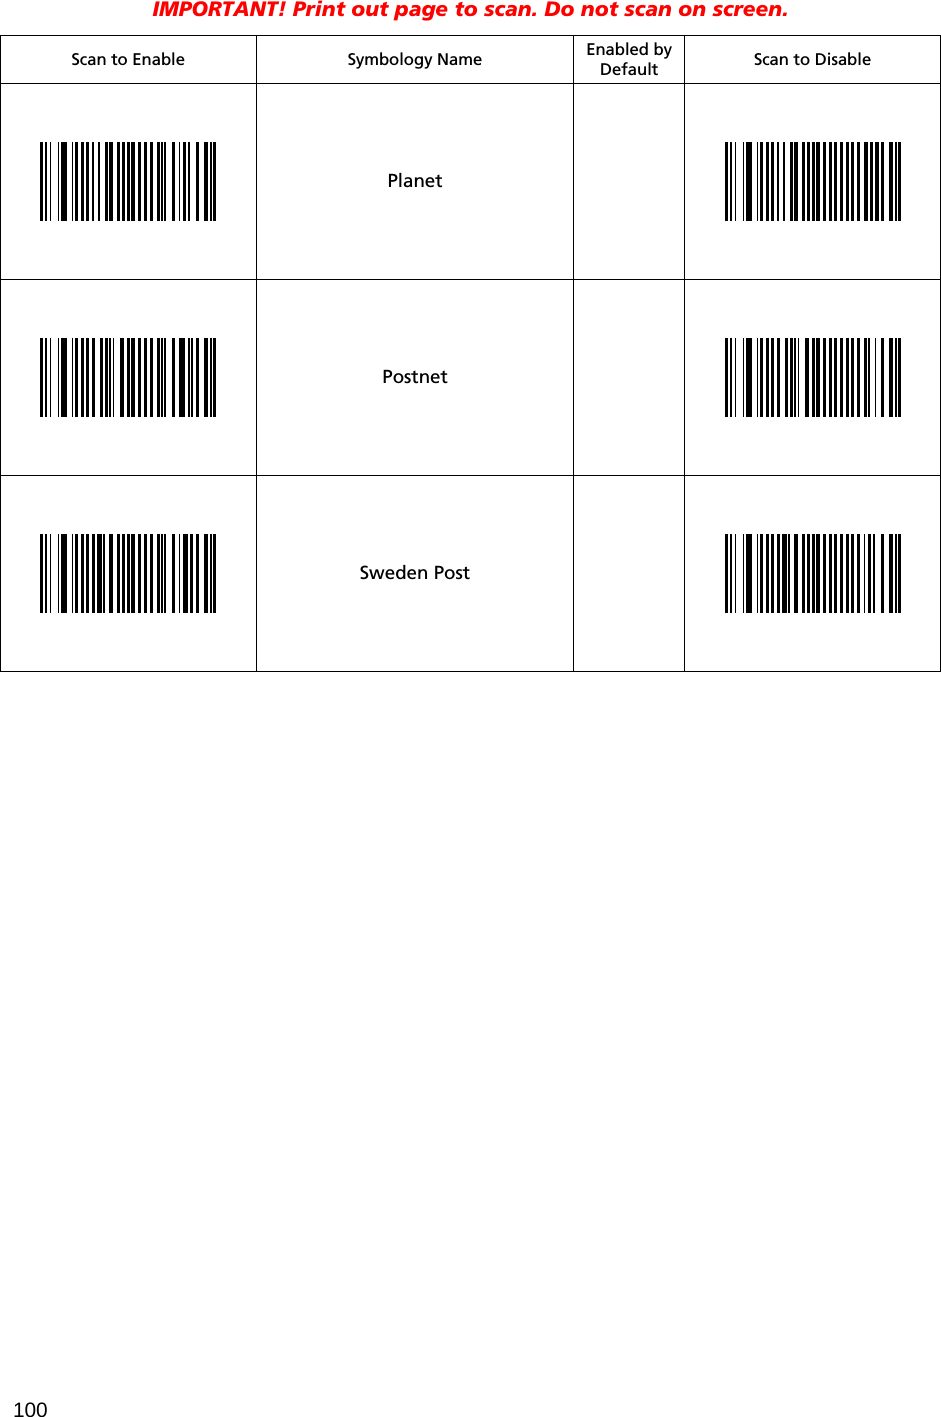 100 IMPORTANT! Print out page to scan. Do not scan on screen.   Scan to Enable  Symbology Name Enabled by Default  Scan to Disable  Planet     Postnet     Sweden Post     